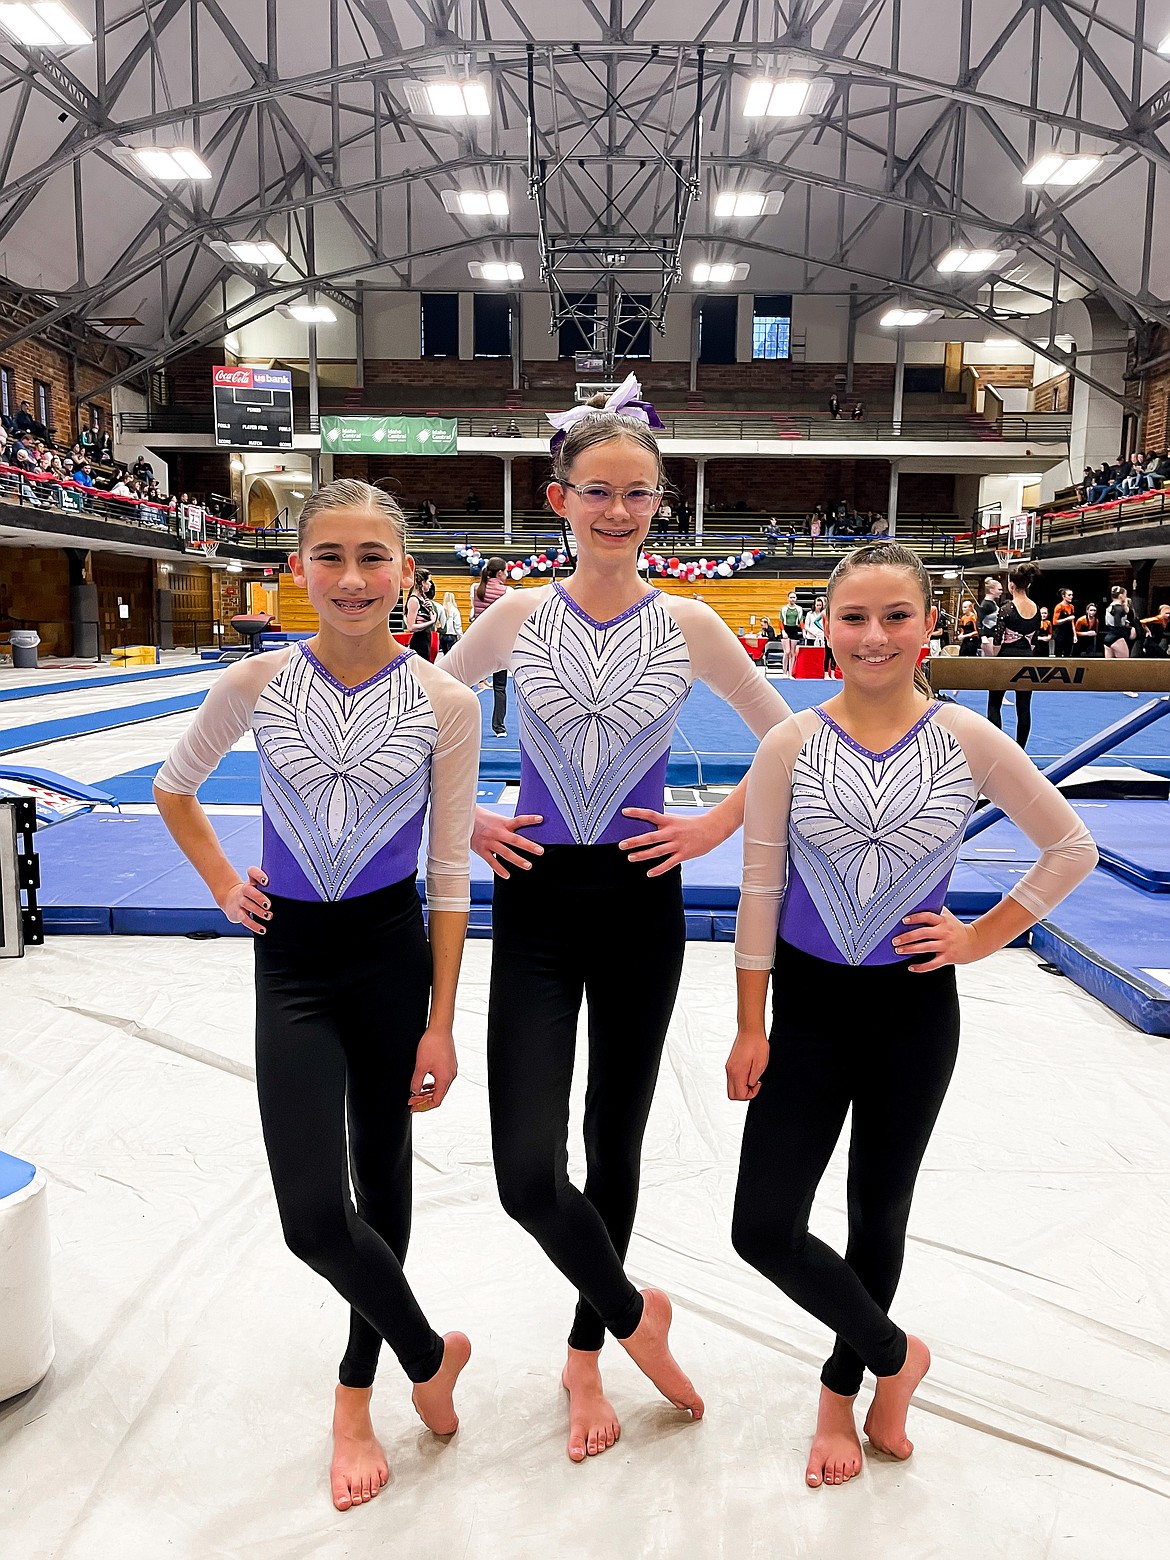 Courtesy photo
Avant Coeur Senior Xcel Golds at the Idaho state championships in Moscow. From left are River Kermelis, Lily Black and Madi Jereczek.